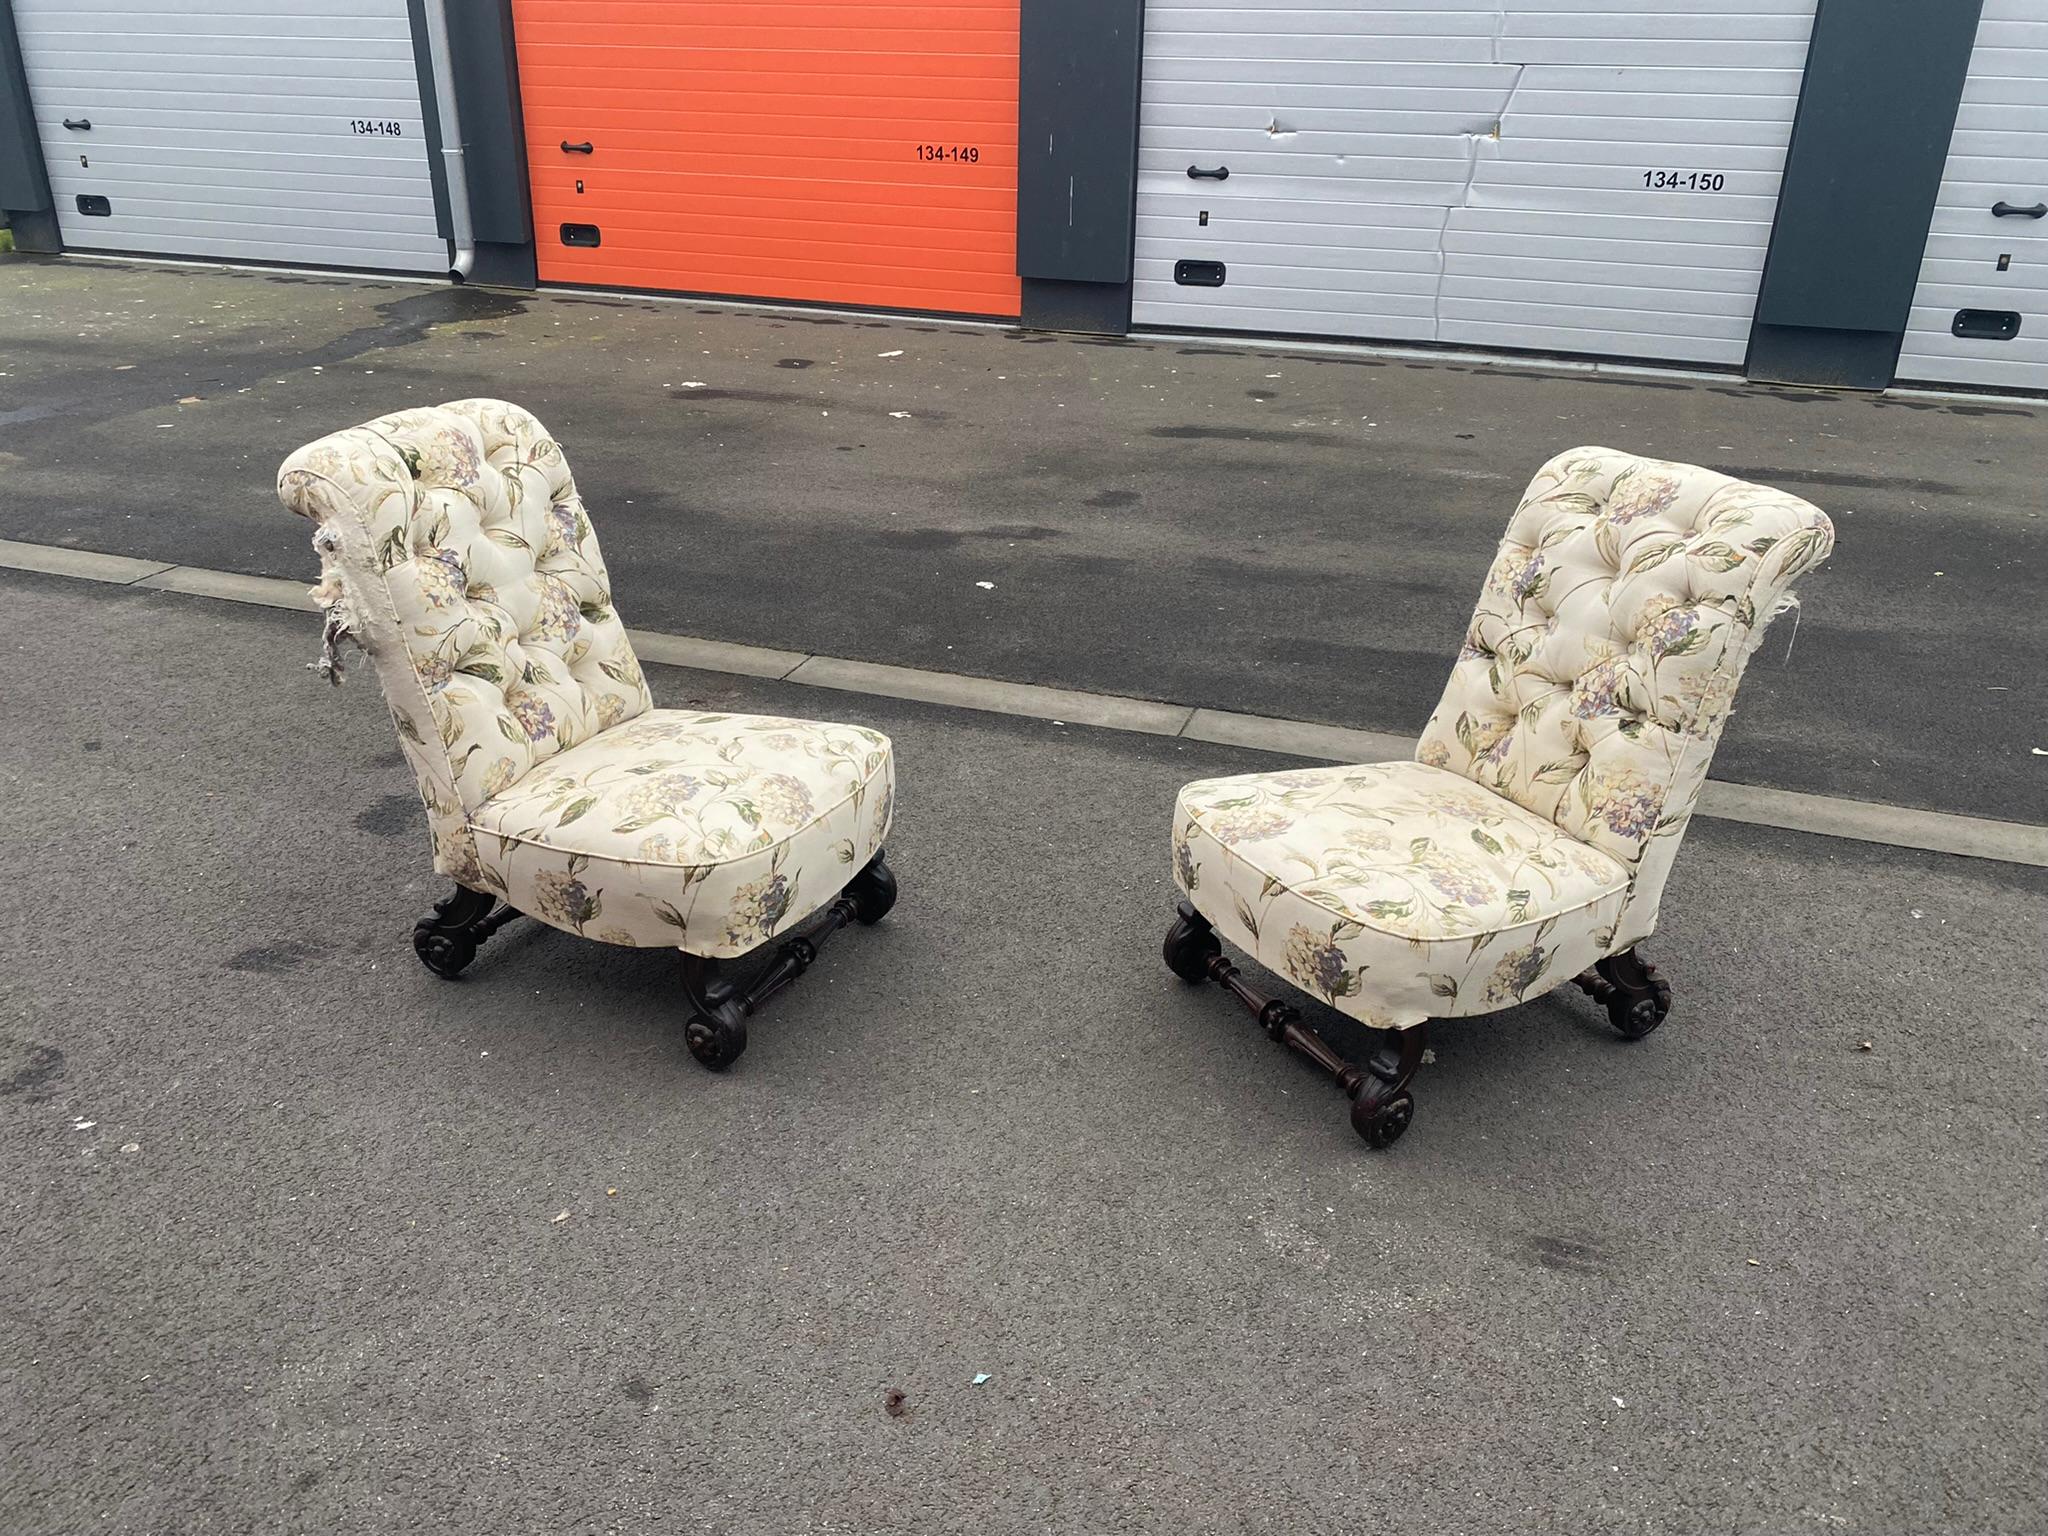 2 original Napoleon III low chairs, France, 1850s.
price is for 1
2 are available